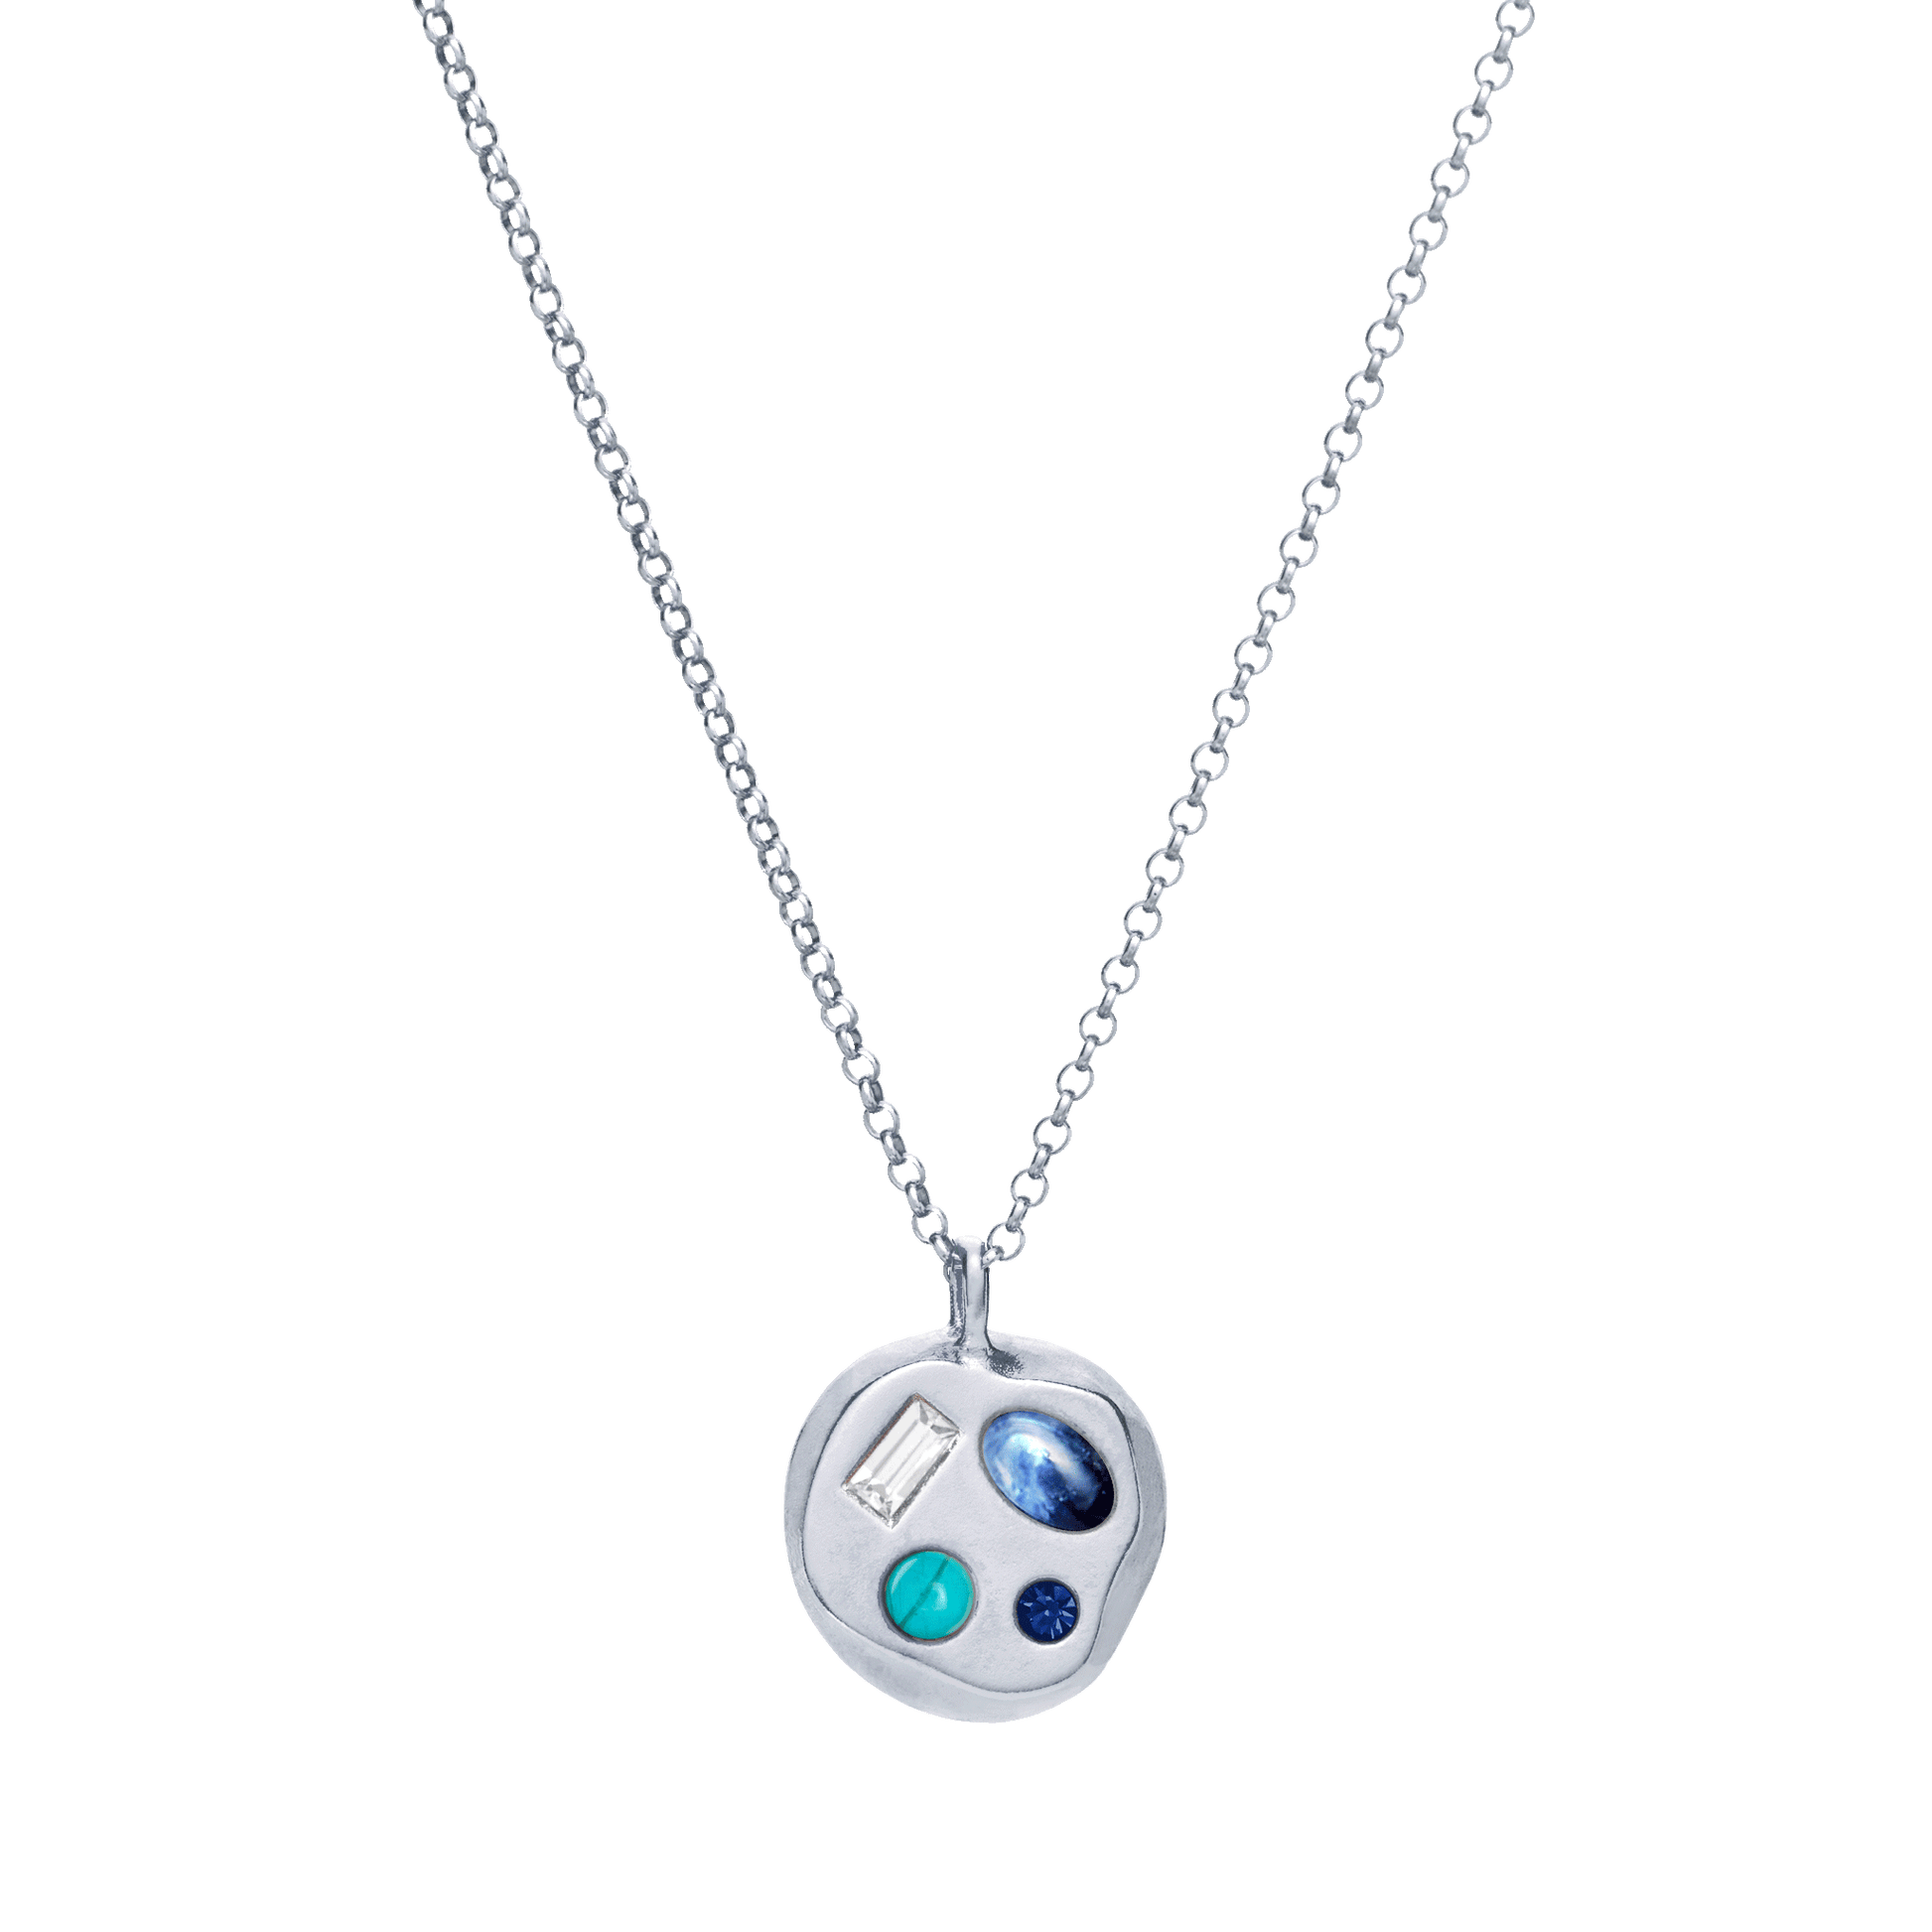 The April Fourteenth Pendant in Sterling Silver